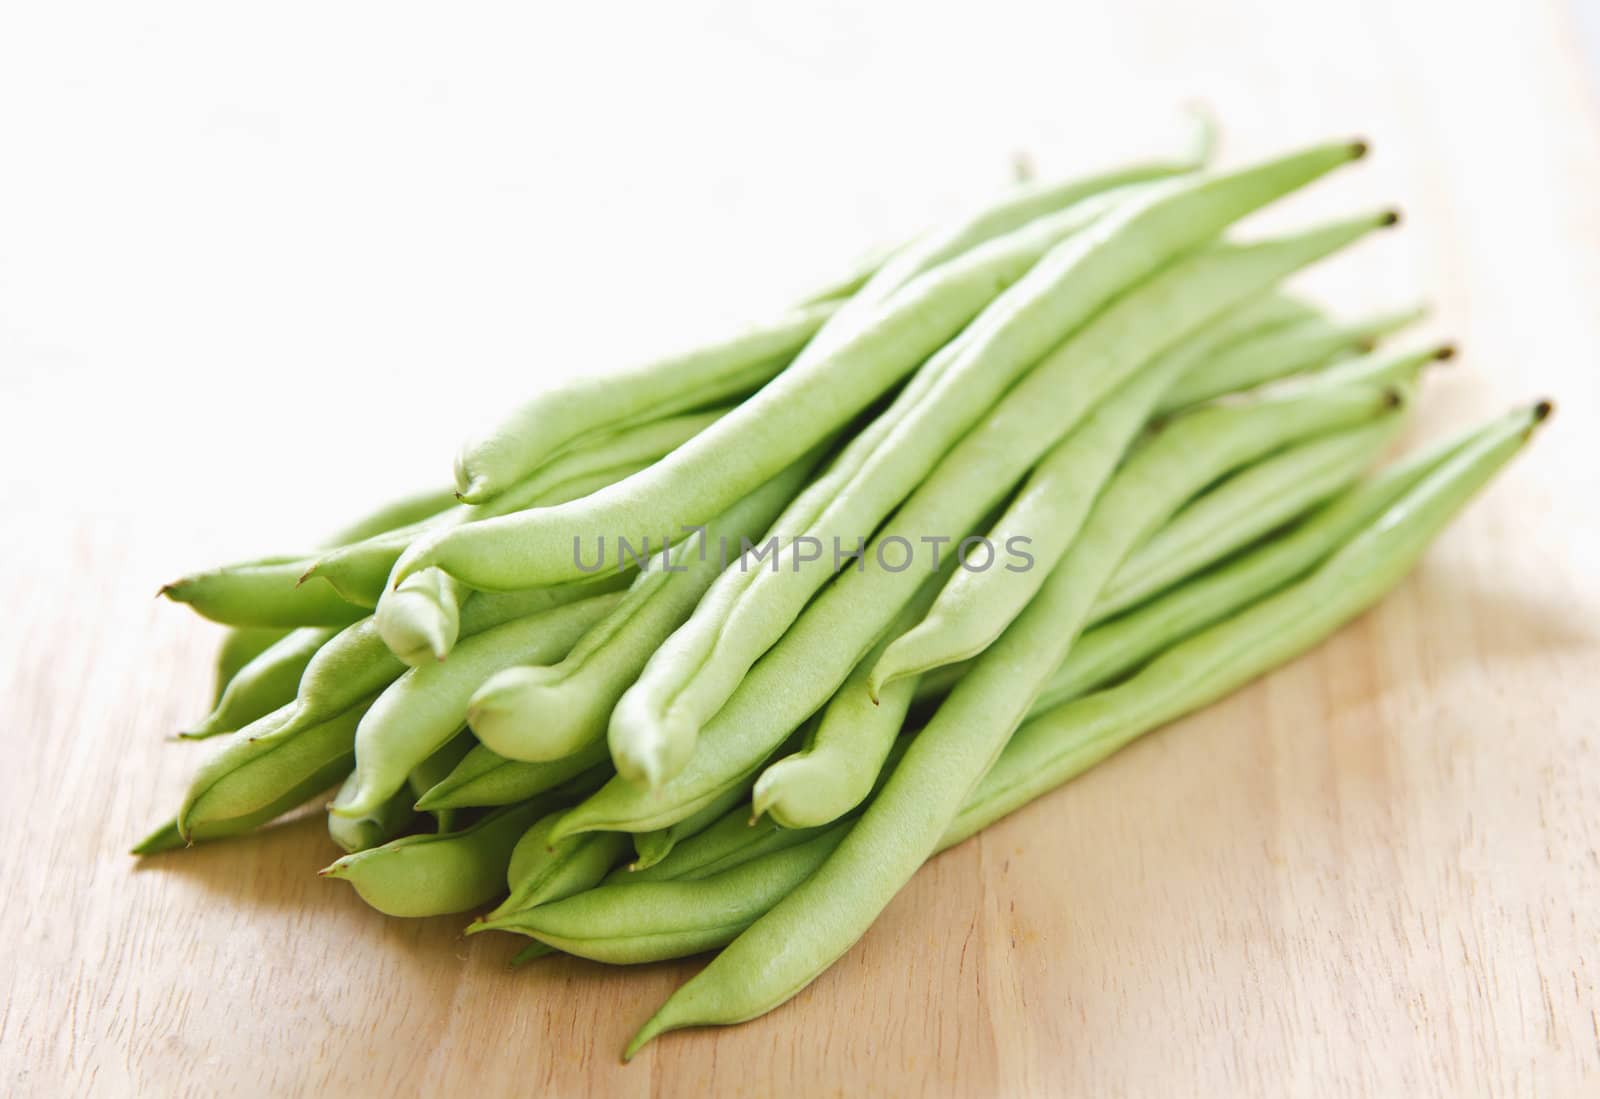 Green beans also knowns as French beans or Strings beans